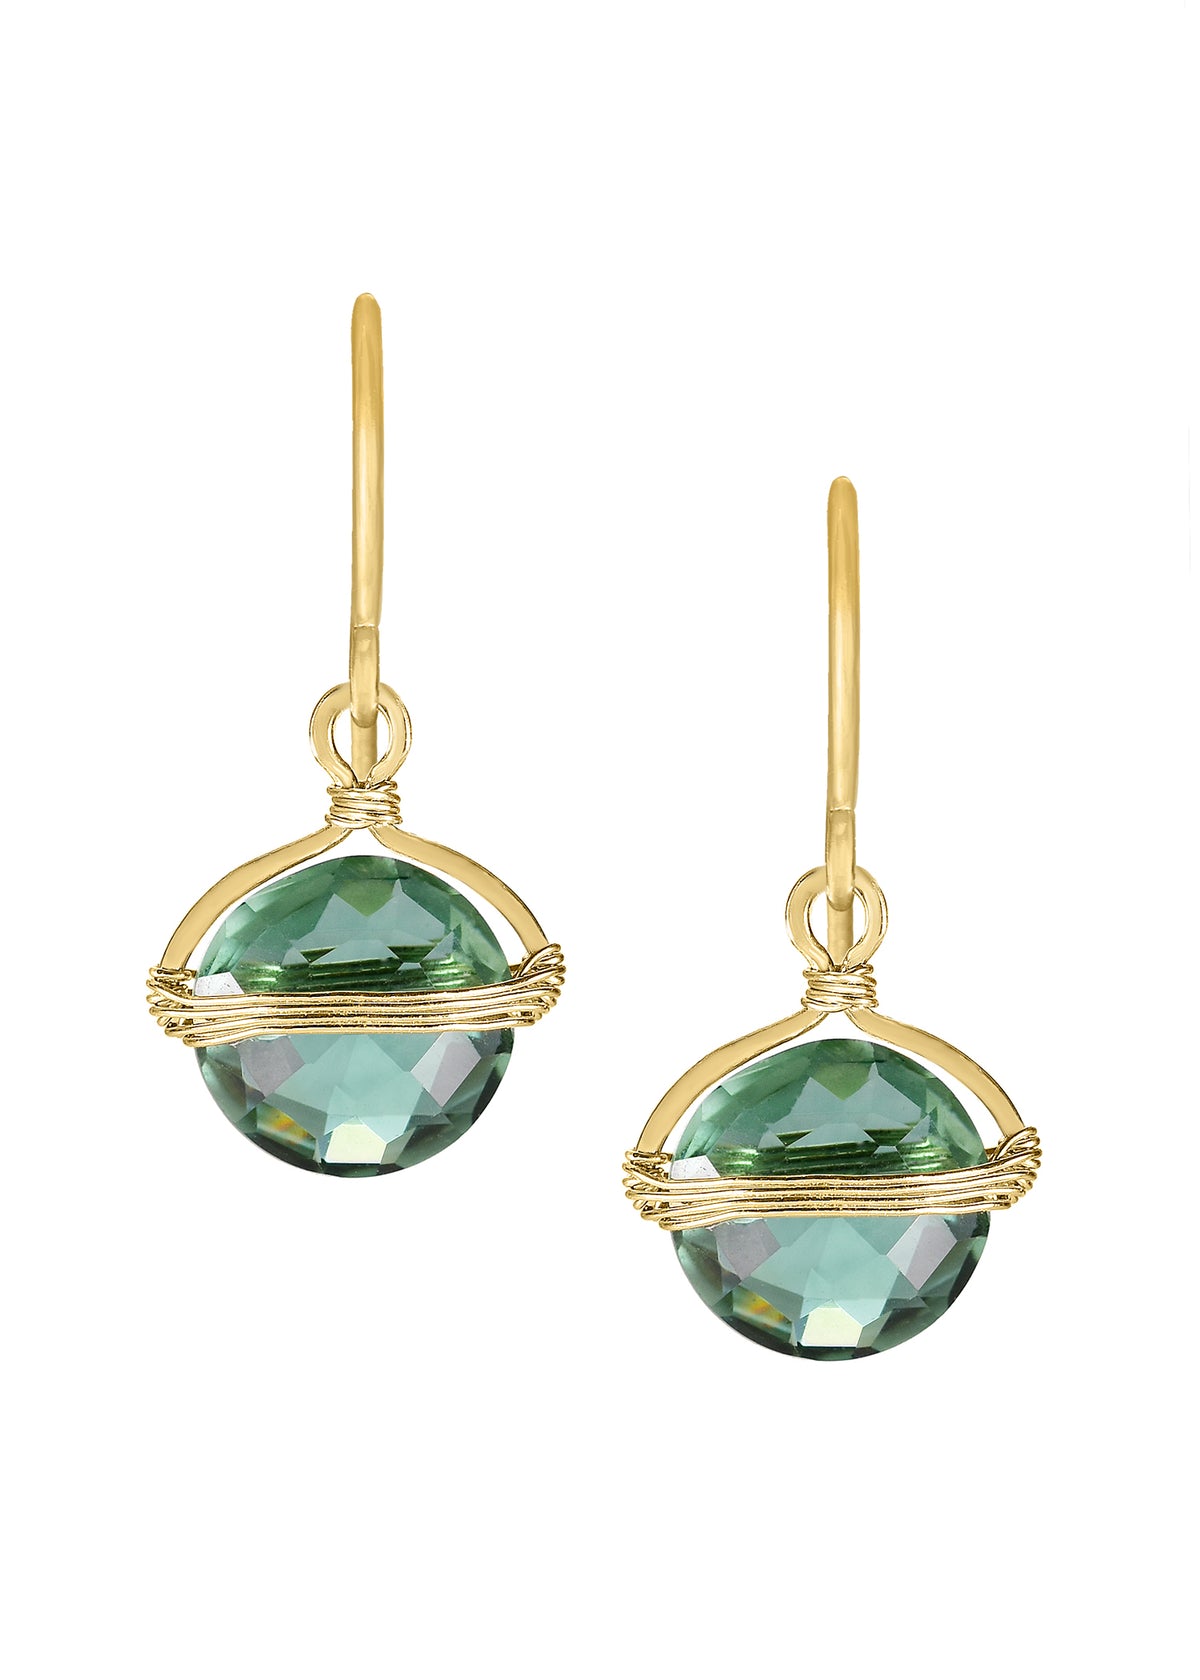 Green quartz 14k gold fill Earrings measure 3/4&quot; in length (including the ear wires) and 3/8&quot; in width Handmade in our Los Angeles studio